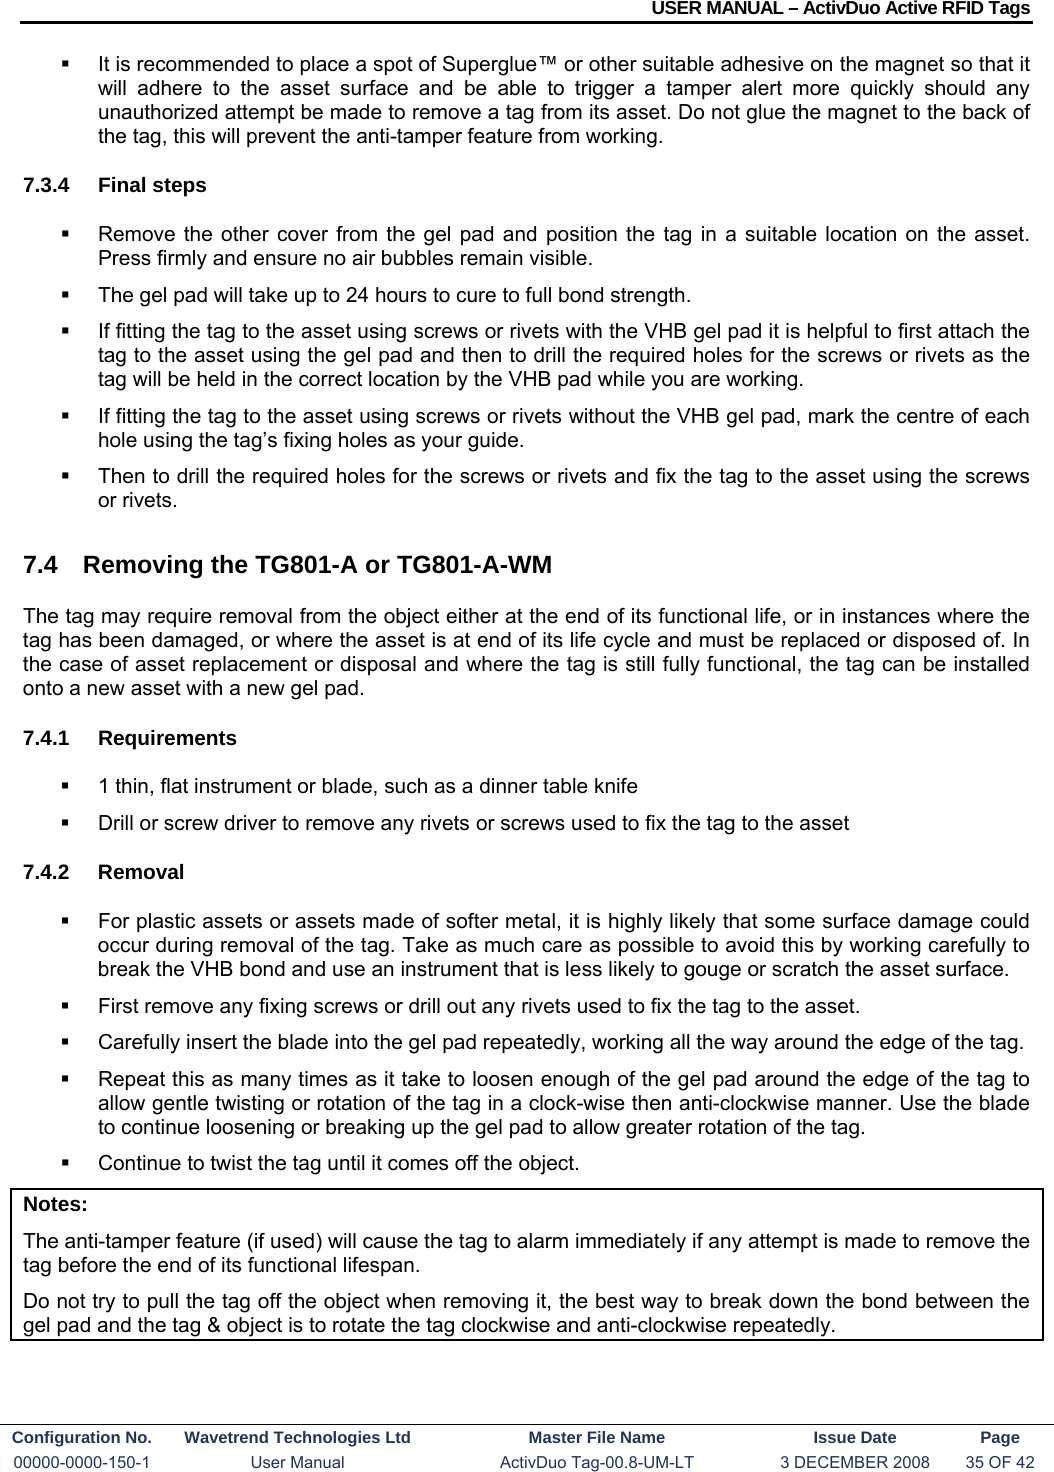 USER MANUAL – ActivDuo Active RFID Tags Configuration No.  Wavetrend Technologies Ltd  Master File Name   Issue Date  Page 00000-0000-150-1  User Manual  ActivDuo Tag-00.8-UM-LT  3 DECEMBER 2008  35 OF 42    It is recommended to place a spot of Superglue™ or other suitable adhesive on the magnet so that it will adhere to the asset surface and be able to trigger a tamper alert more quickly should any unauthorized attempt be made to remove a tag from its asset. Do not glue the magnet to the back of the tag, this will prevent the anti-tamper feature from working. 7.3.4 Final steps   Remove the other cover from the gel pad and position the tag in a suitable location on the asset. Press firmly and ensure no air bubbles remain visible.   The gel pad will take up to 24 hours to cure to full bond strength.   If fitting the tag to the asset using screws or rivets with the VHB gel pad it is helpful to first attach the tag to the asset using the gel pad and then to drill the required holes for the screws or rivets as the tag will be held in the correct location by the VHB pad while you are working.   If fitting the tag to the asset using screws or rivets without the VHB gel pad, mark the centre of each hole using the tag’s fixing holes as your guide.     Then to drill the required holes for the screws or rivets and fix the tag to the asset using the screws or rivets. 7.4  Removing the TG801-A or TG801-A-WM The tag may require removal from the object either at the end of its functional life, or in instances where the tag has been damaged, or where the asset is at end of its life cycle and must be replaced or disposed of. In the case of asset replacement or disposal and where the tag is still fully functional, the tag can be installed onto a new asset with a new gel pad. 7.4.1 Requirements   1 thin, flat instrument or blade, such as a dinner table knife    Drill or screw driver to remove any rivets or screws used to fix the tag to the asset 7.4.2 Removal   For plastic assets or assets made of softer metal, it is highly likely that some surface damage could occur during removal of the tag. Take as much care as possible to avoid this by working carefully to break the VHB bond and use an instrument that is less likely to gouge or scratch the asset surface.   First remove any fixing screws or drill out any rivets used to fix the tag to the asset.   Carefully insert the blade into the gel pad repeatedly, working all the way around the edge of the tag.   Repeat this as many times as it take to loosen enough of the gel pad around the edge of the tag to allow gentle twisting or rotation of the tag in a clock-wise then anti-clockwise manner. Use the blade to continue loosening or breaking up the gel pad to allow greater rotation of the tag.   Continue to twist the tag until it comes off the object. Notes: The anti-tamper feature (if used) will cause the tag to alarm immediately if any attempt is made to remove the tag before the end of its functional lifespan. Do not try to pull the tag off the object when removing it, the best way to break down the bond between the gel pad and the tag &amp; object is to rotate the tag clockwise and anti-clockwise repeatedly. 